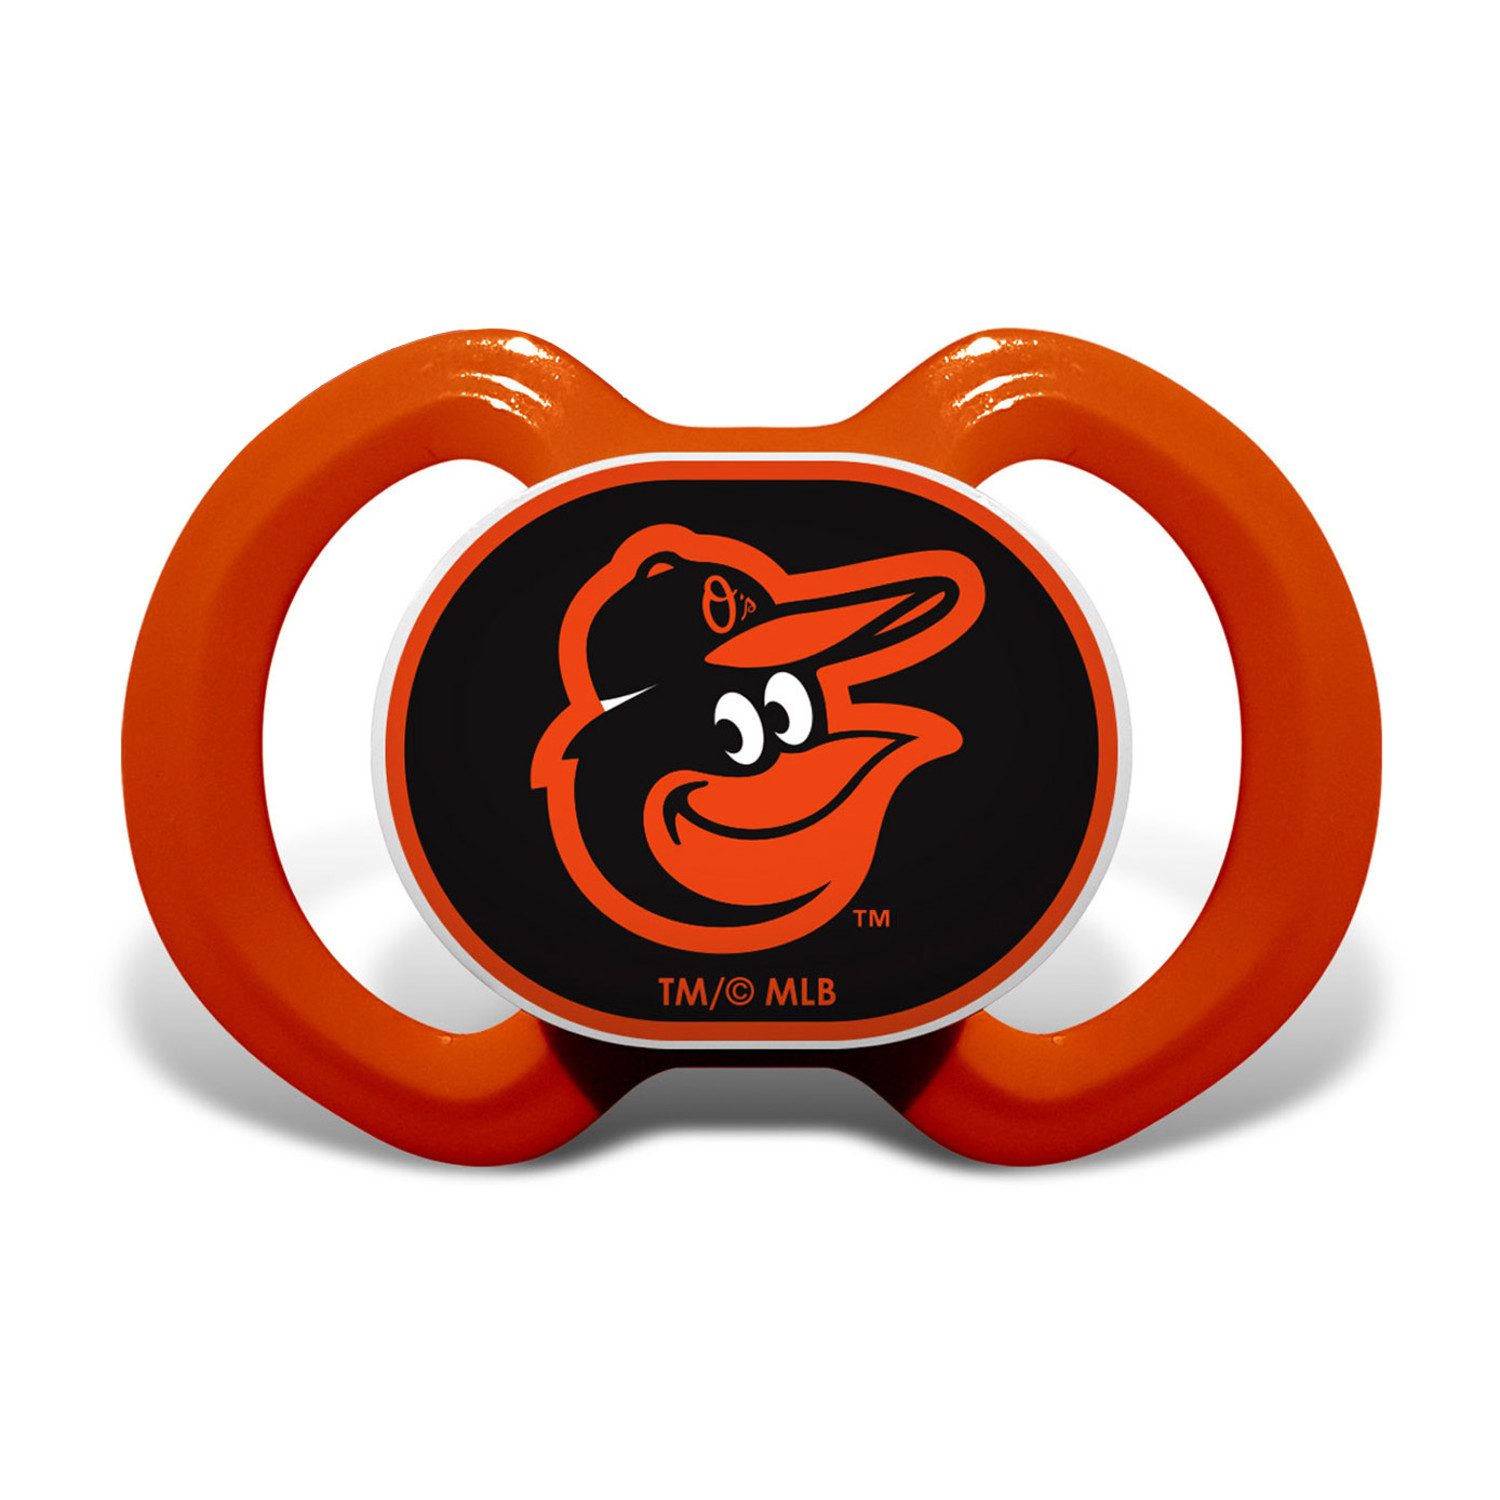 BabyFanatic Officially Licensed 3 Piece Unisex Gift Set - MLB Baltimore Orioles - image 3 of 4